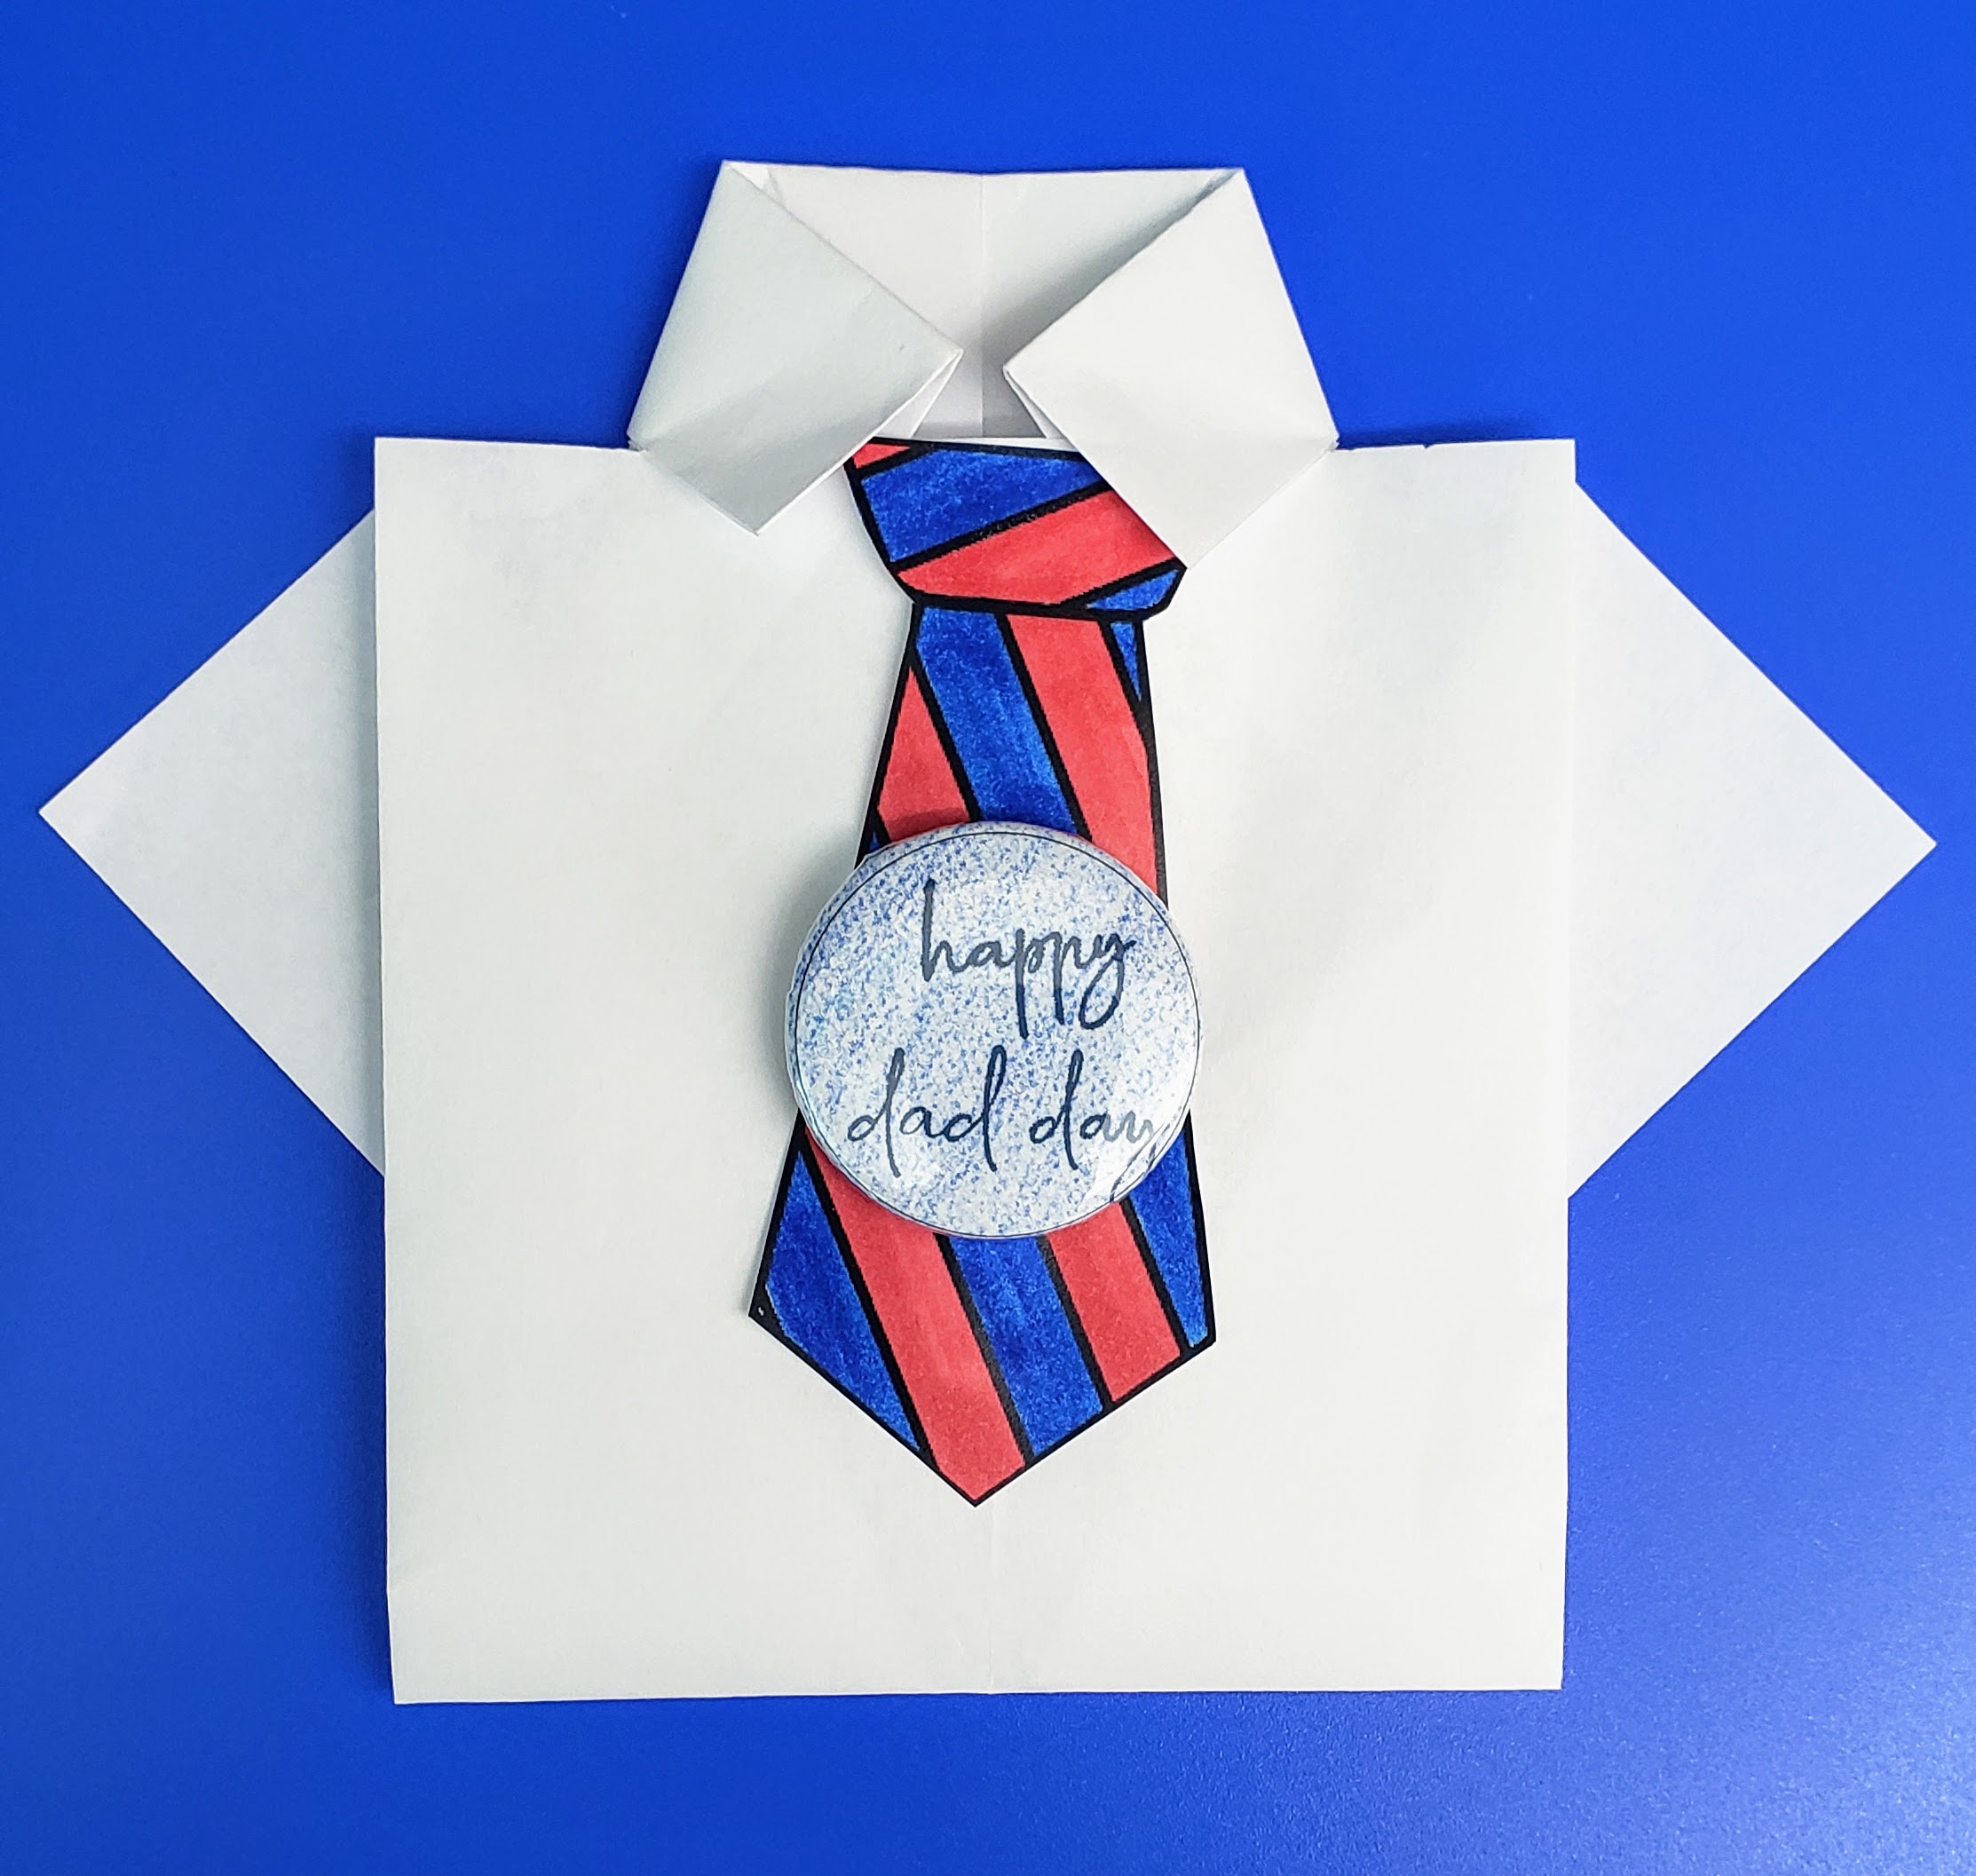 White origami paper shirt with blue and red striped paper tie. Button reading "happy dad day" on front of paper tie. 